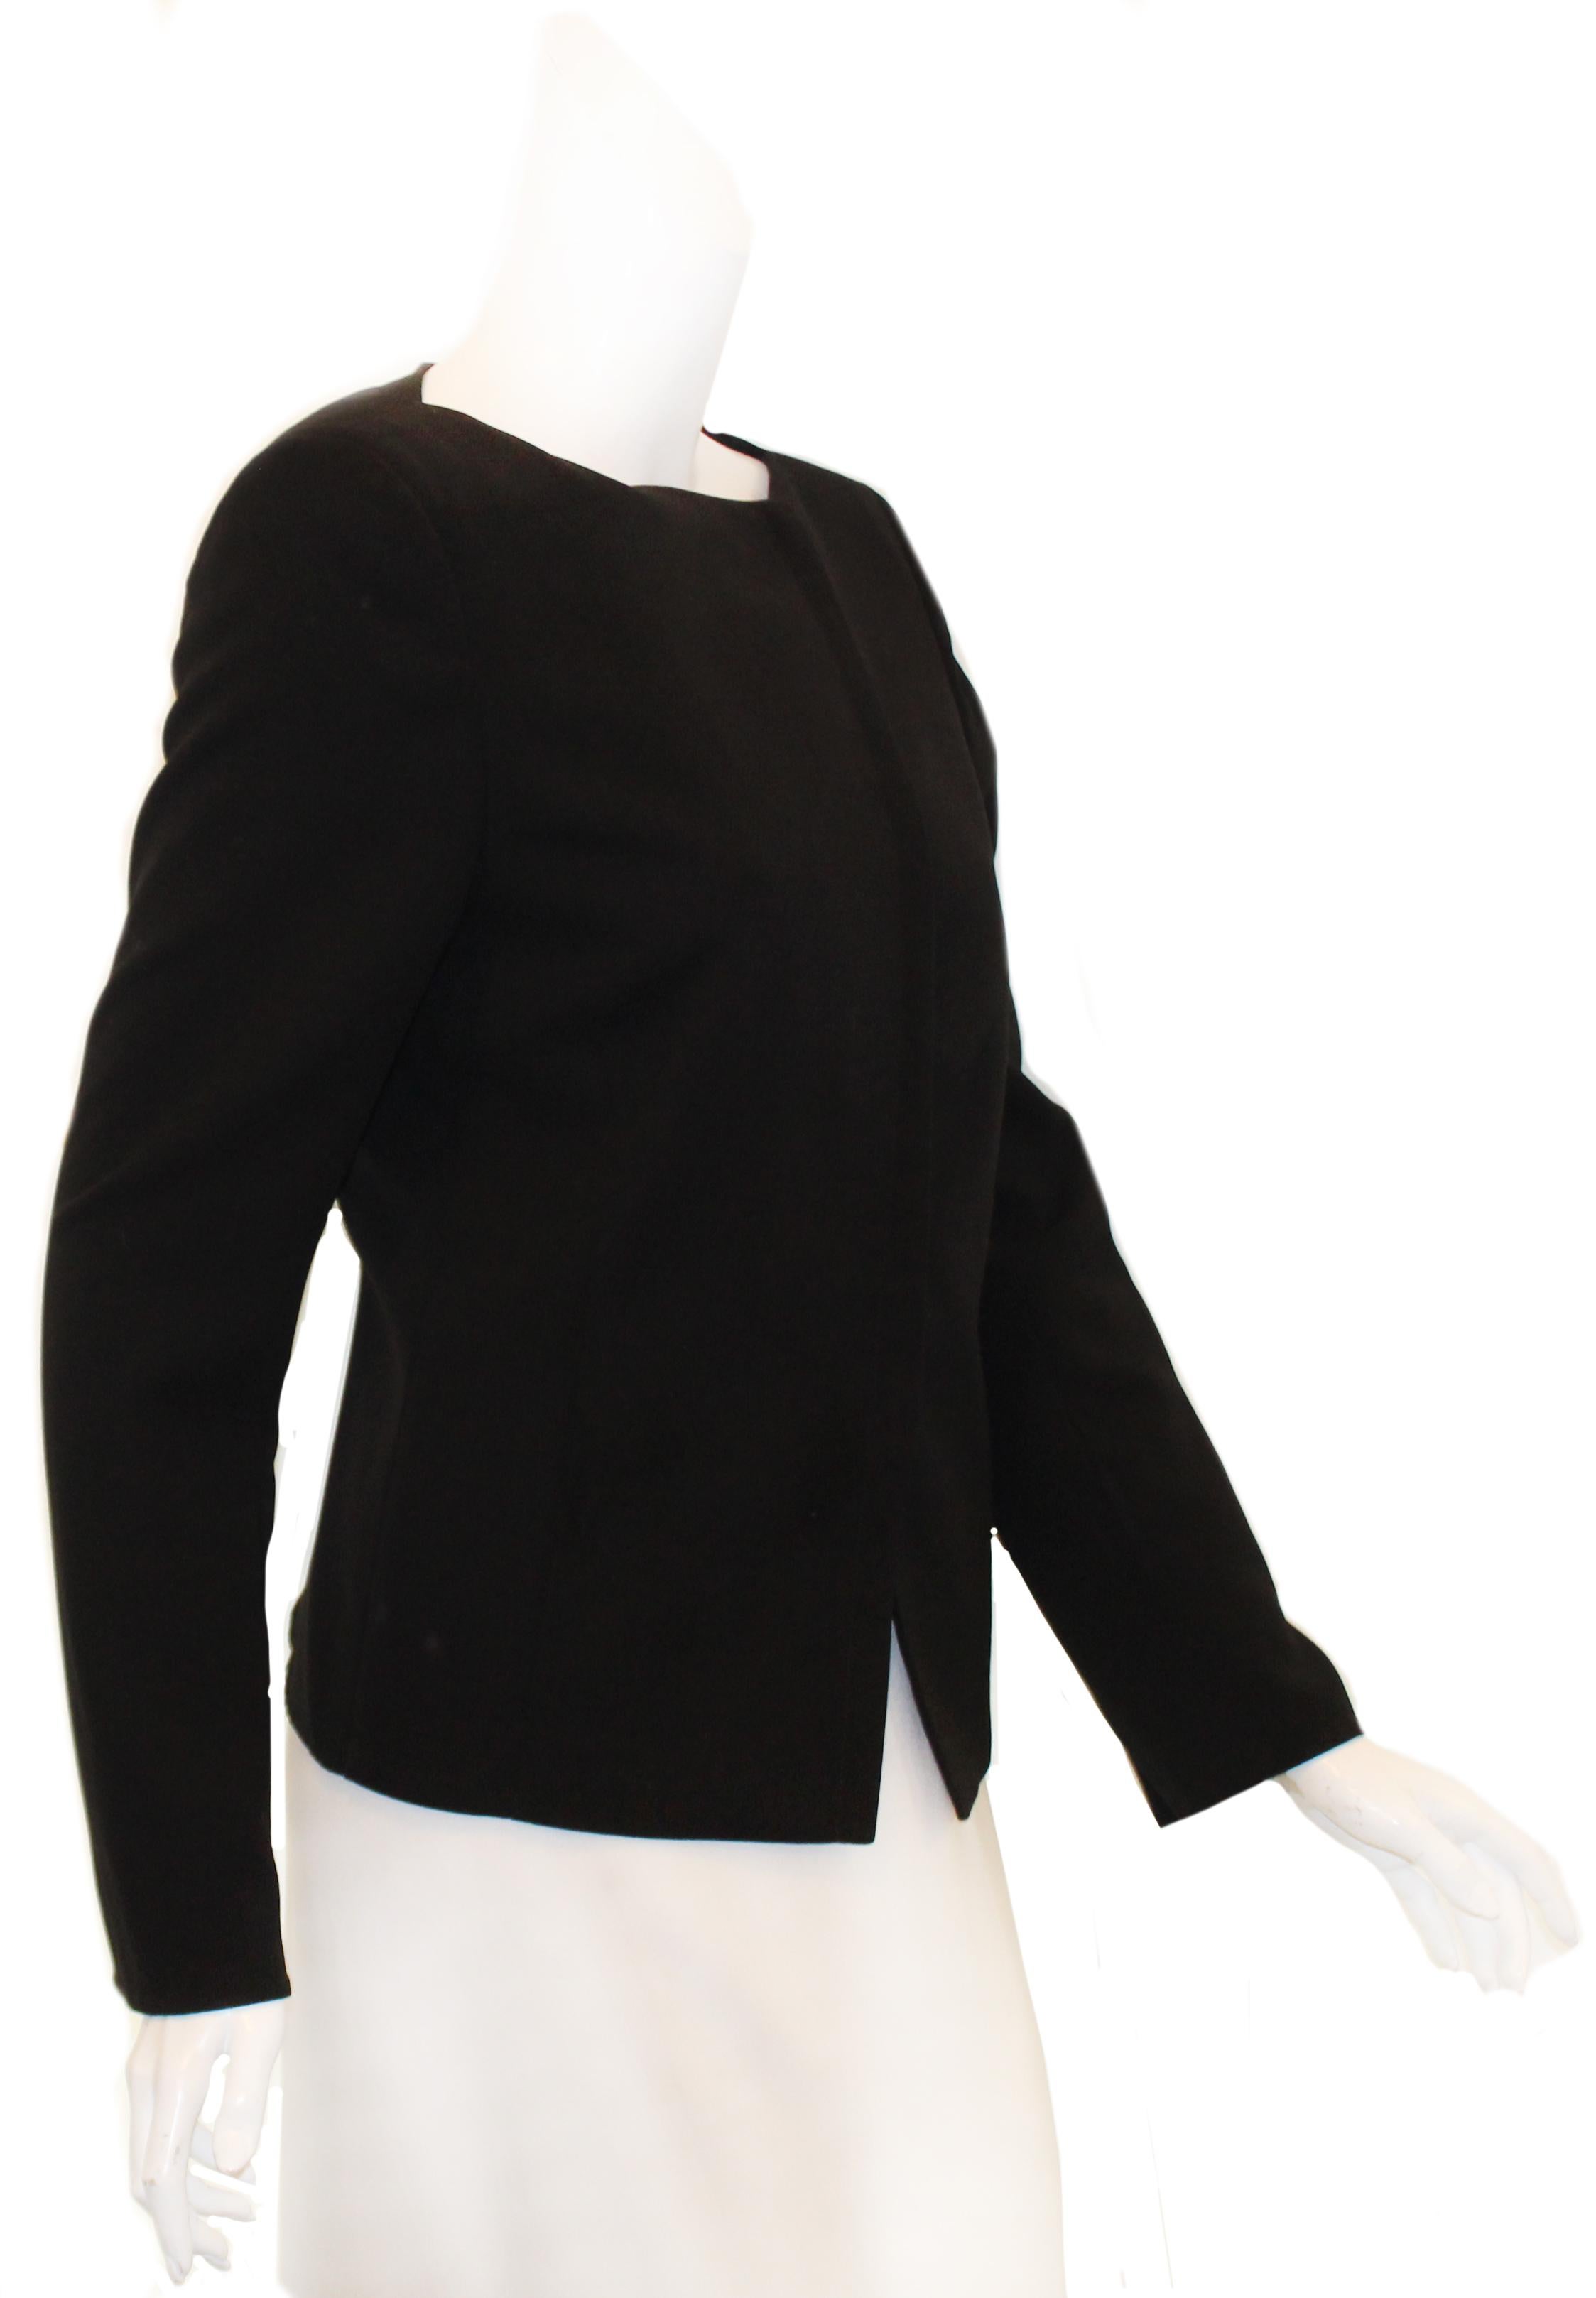 Akris black wool jacket  incorporates a zipper for closure on the asymmetric front opening.  With a round collar and front slit pockets this jacket is beautifully tailored, versatile and practical to be worn with a skirt or slacks.  This jacket is